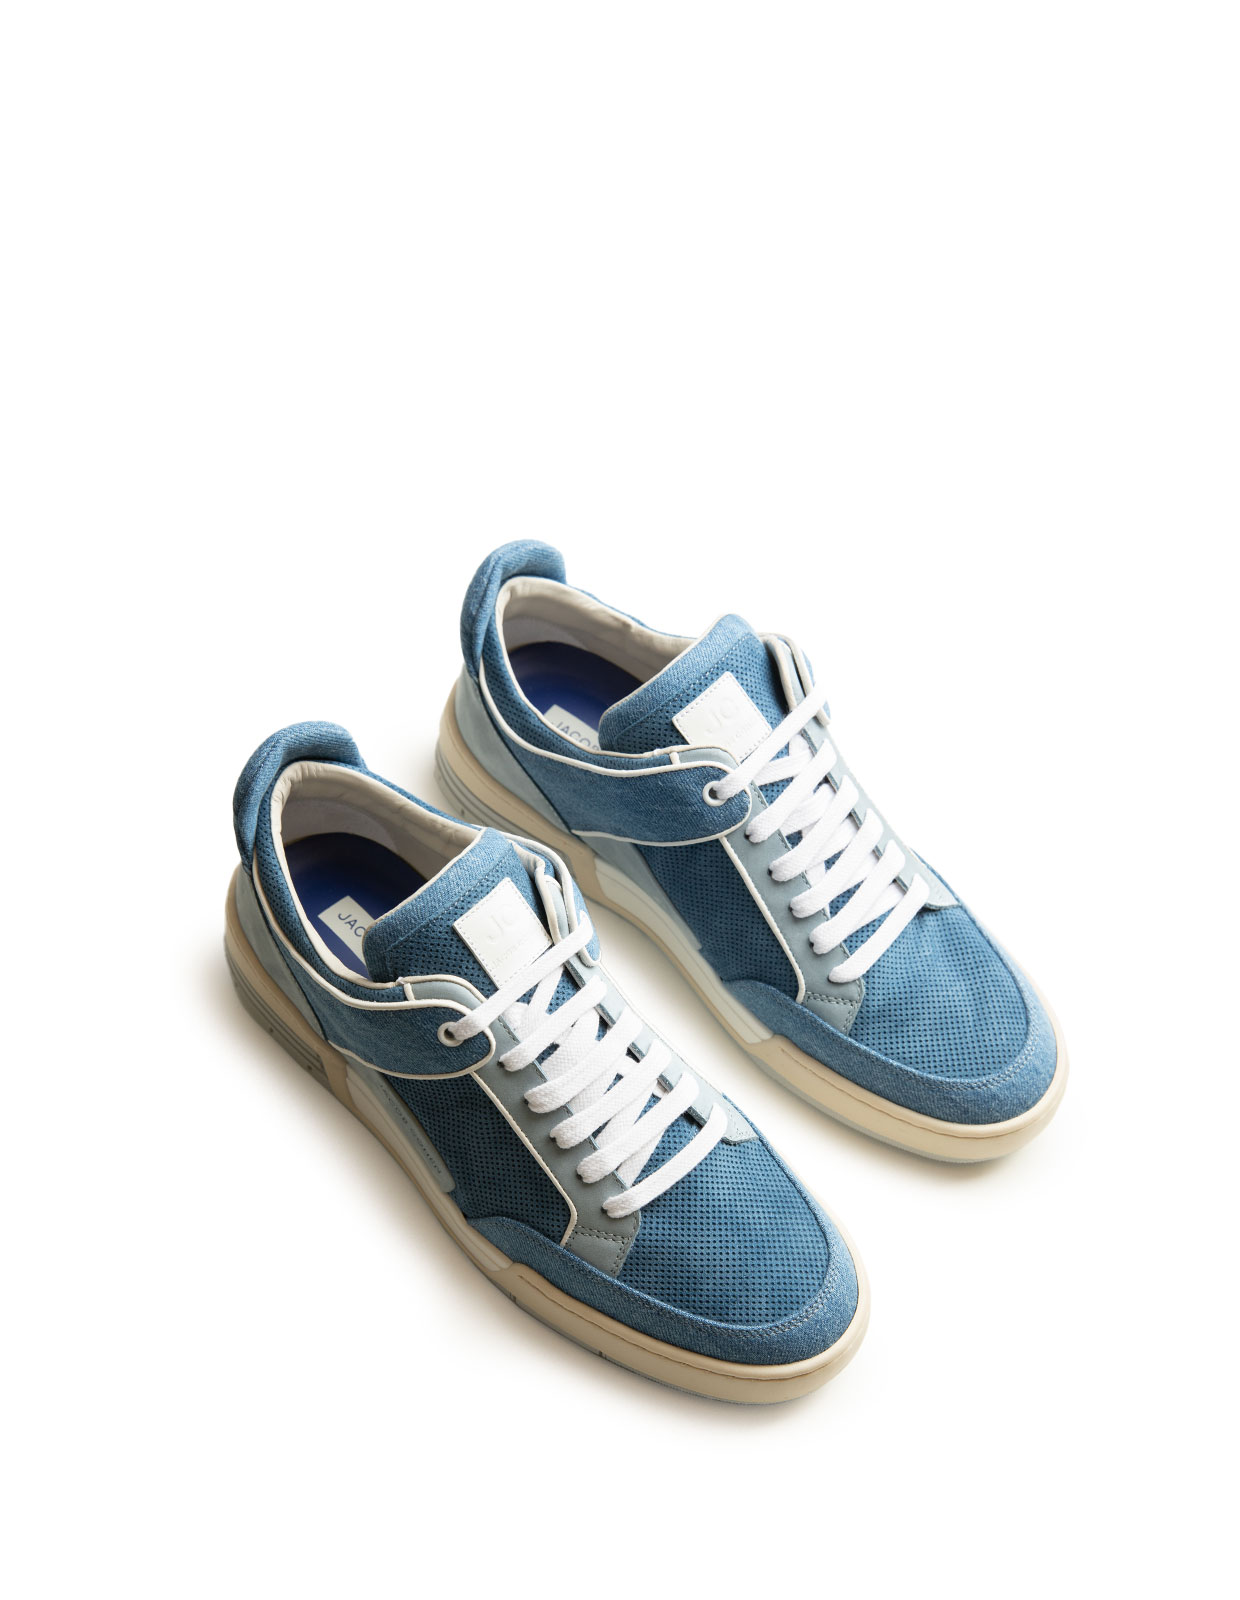 Shooter Leather Cotton Sneakers Blue/White